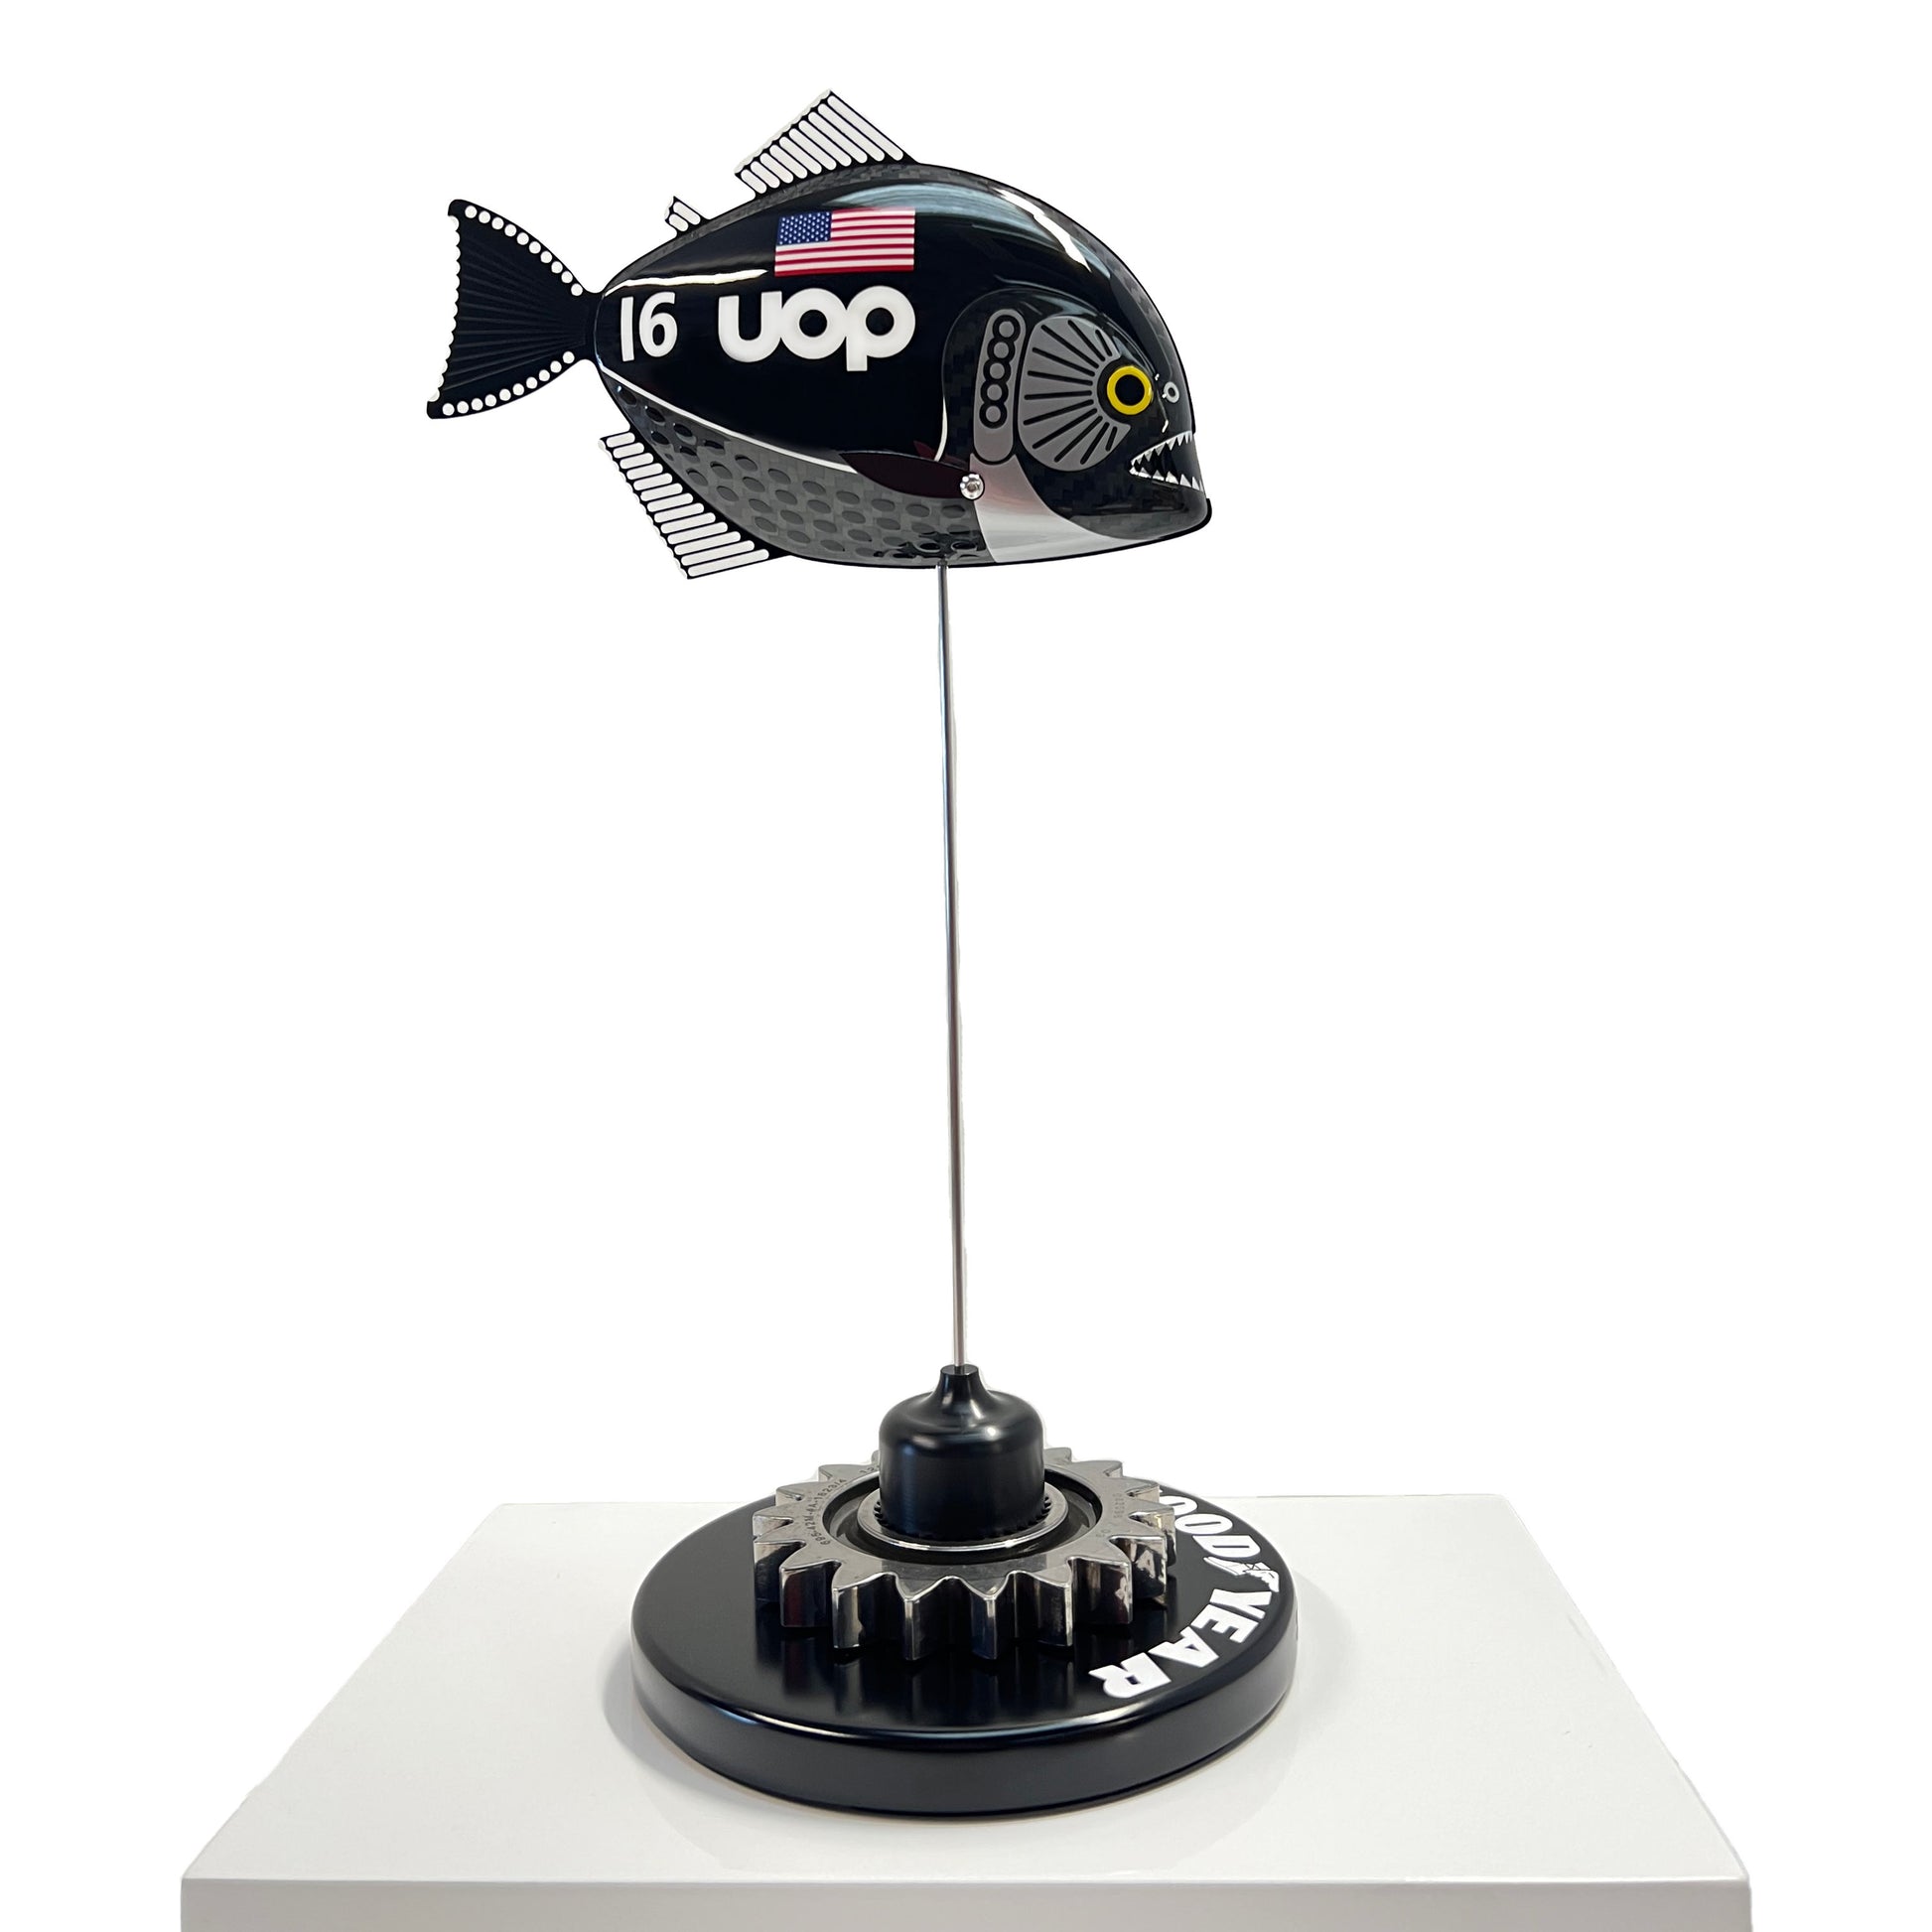 Carbon fibre Piranha fish with UOP livery on a black base with F1 gear